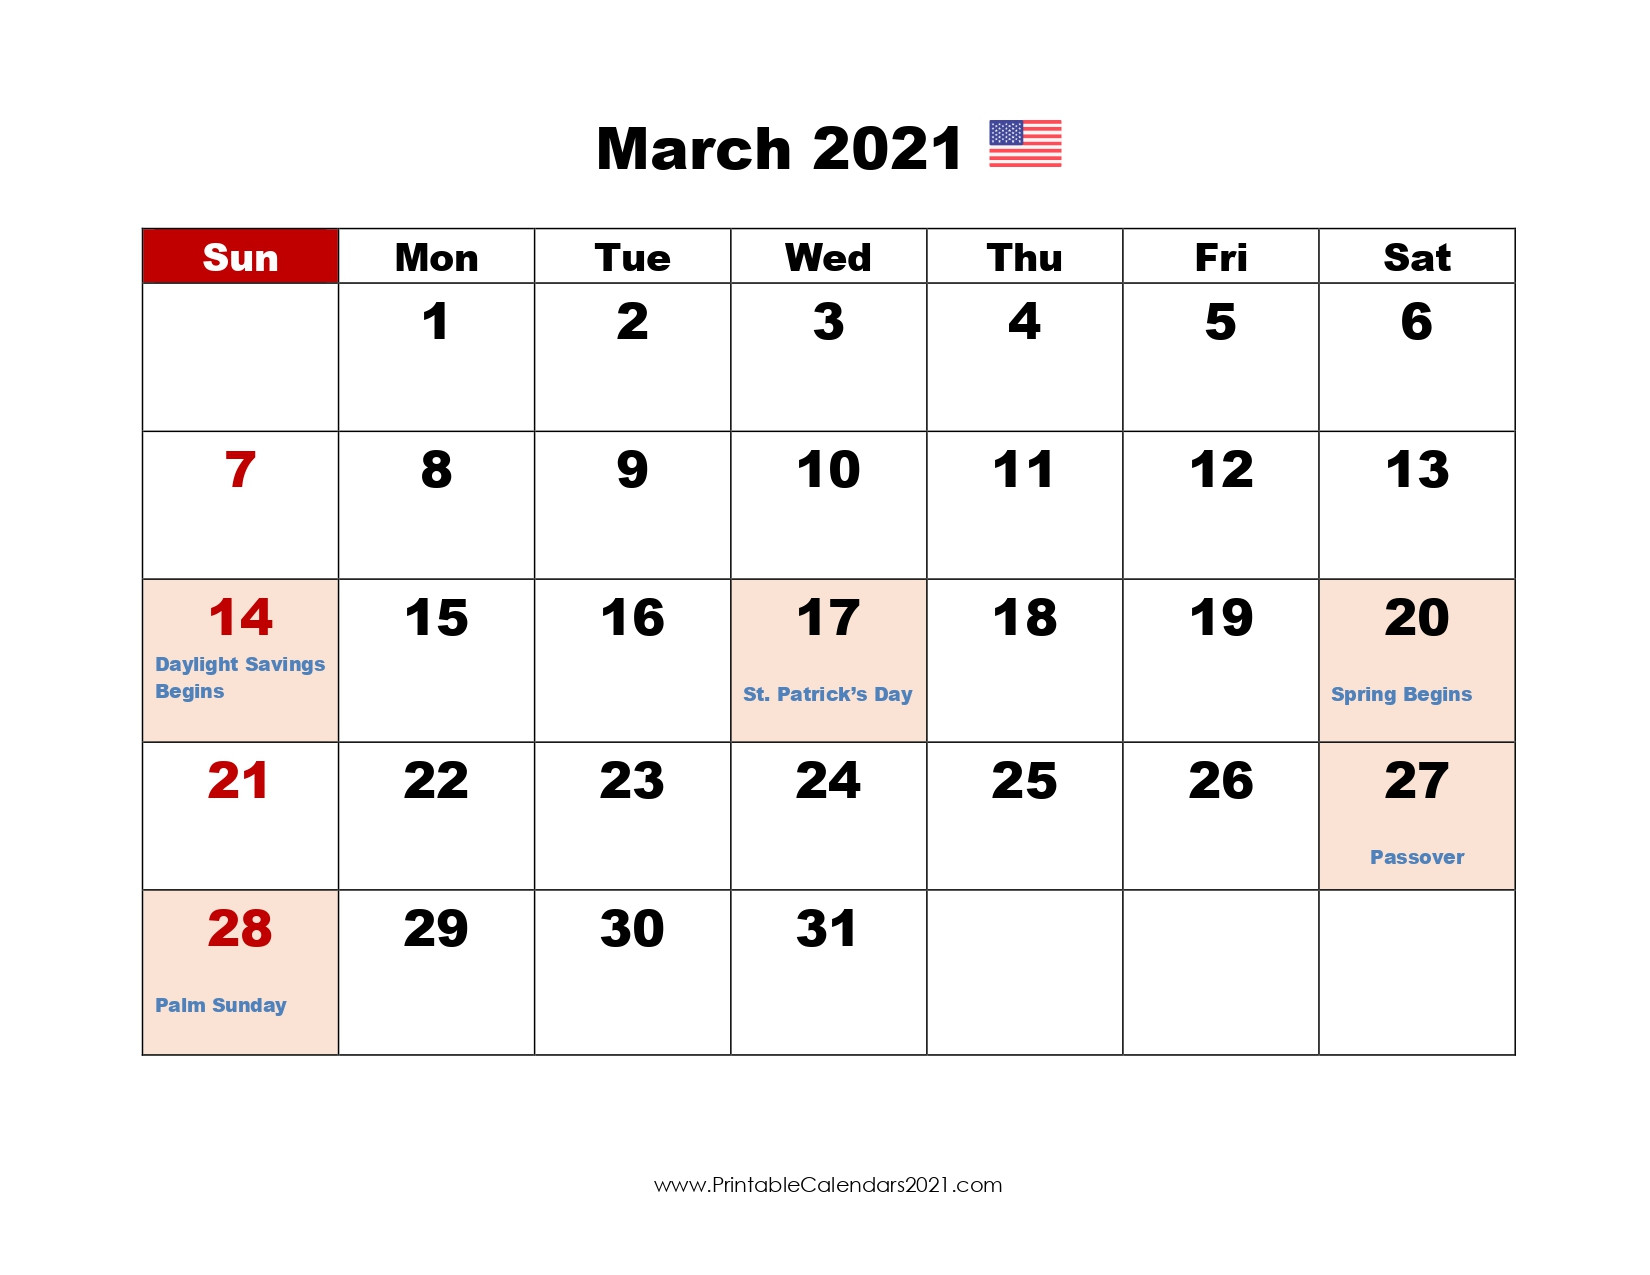 68+ Free March 2021 Calendar Printable With Holidays-Daily Holiday Calendar September 2021